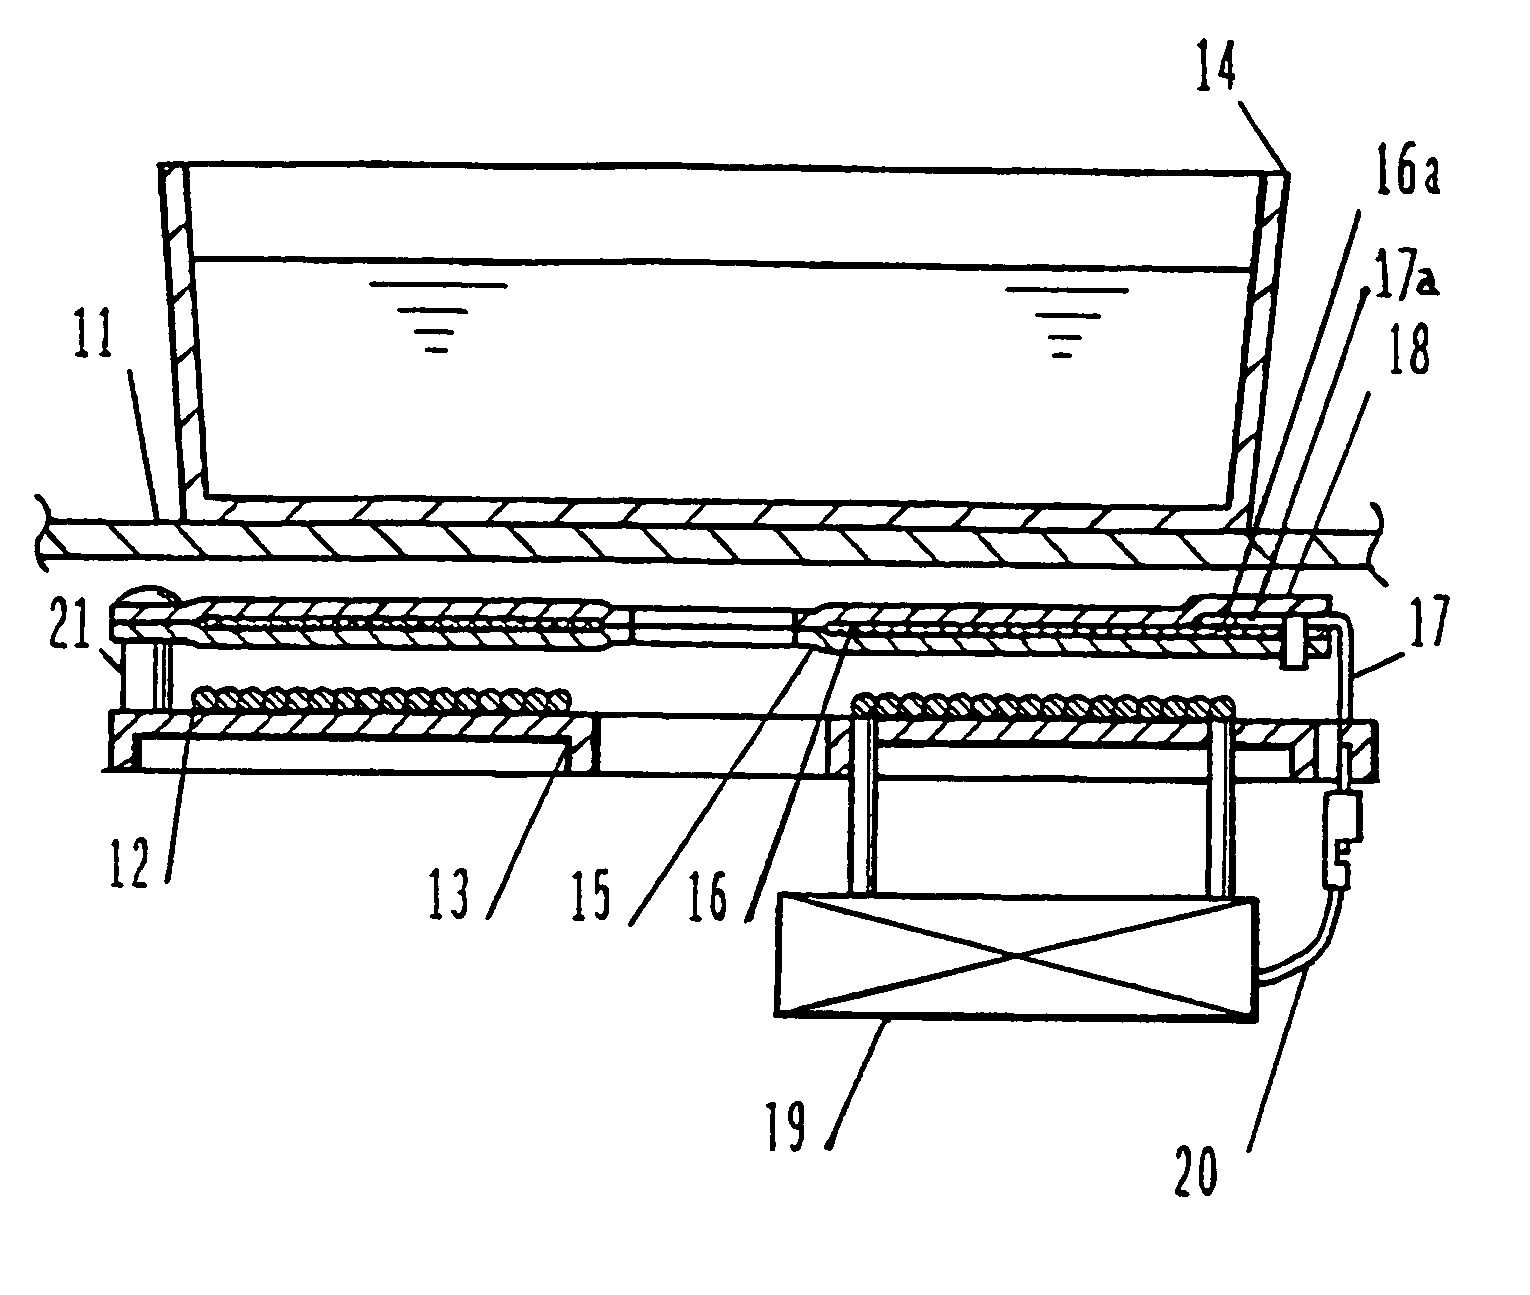 Induction heating apparatus